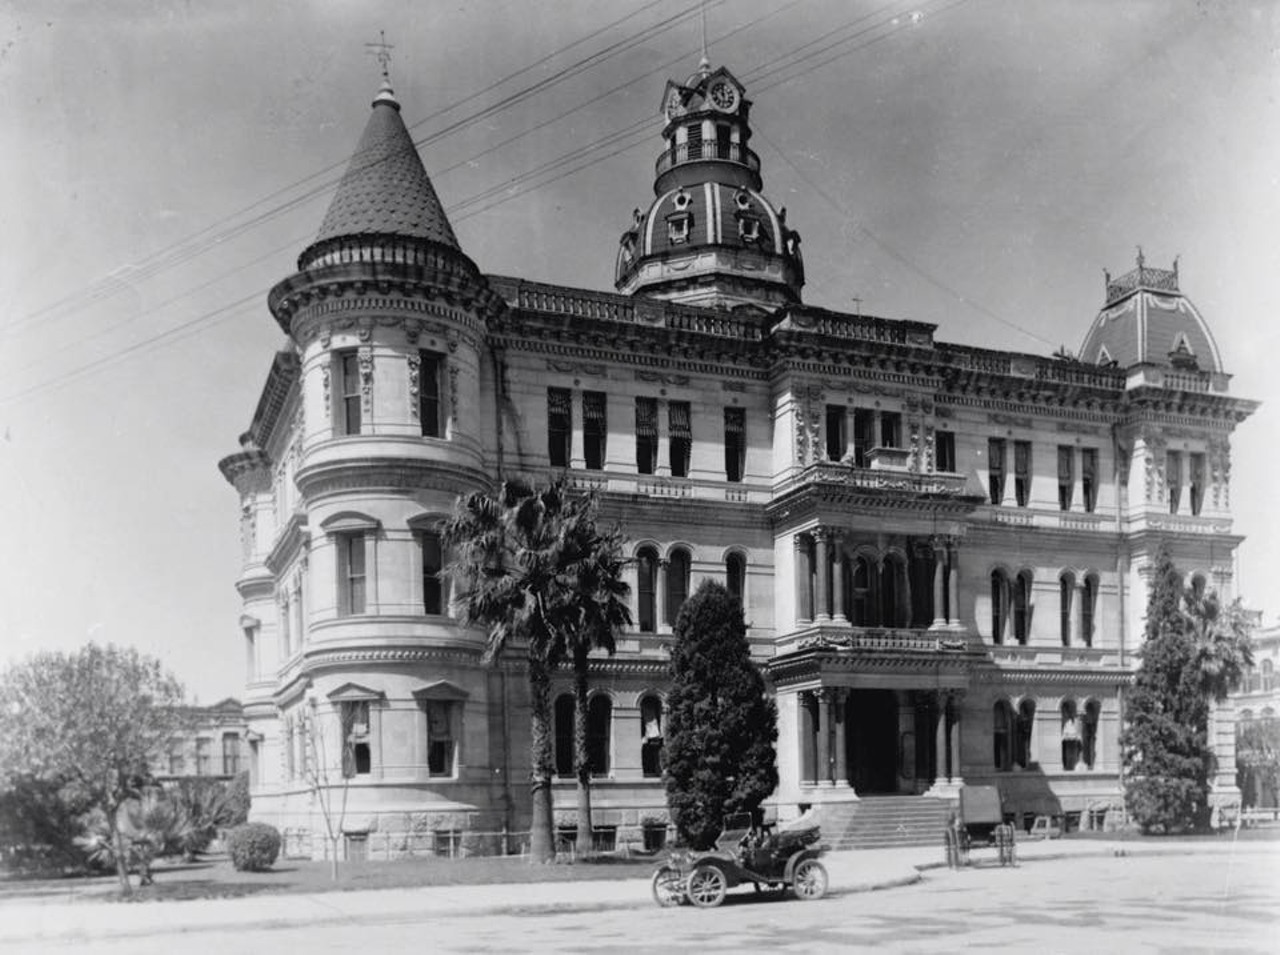 Circa 1915,  San Antonio City Hall, which was completed in 1891. In 1927, a fourth floor was added and is still being used today.